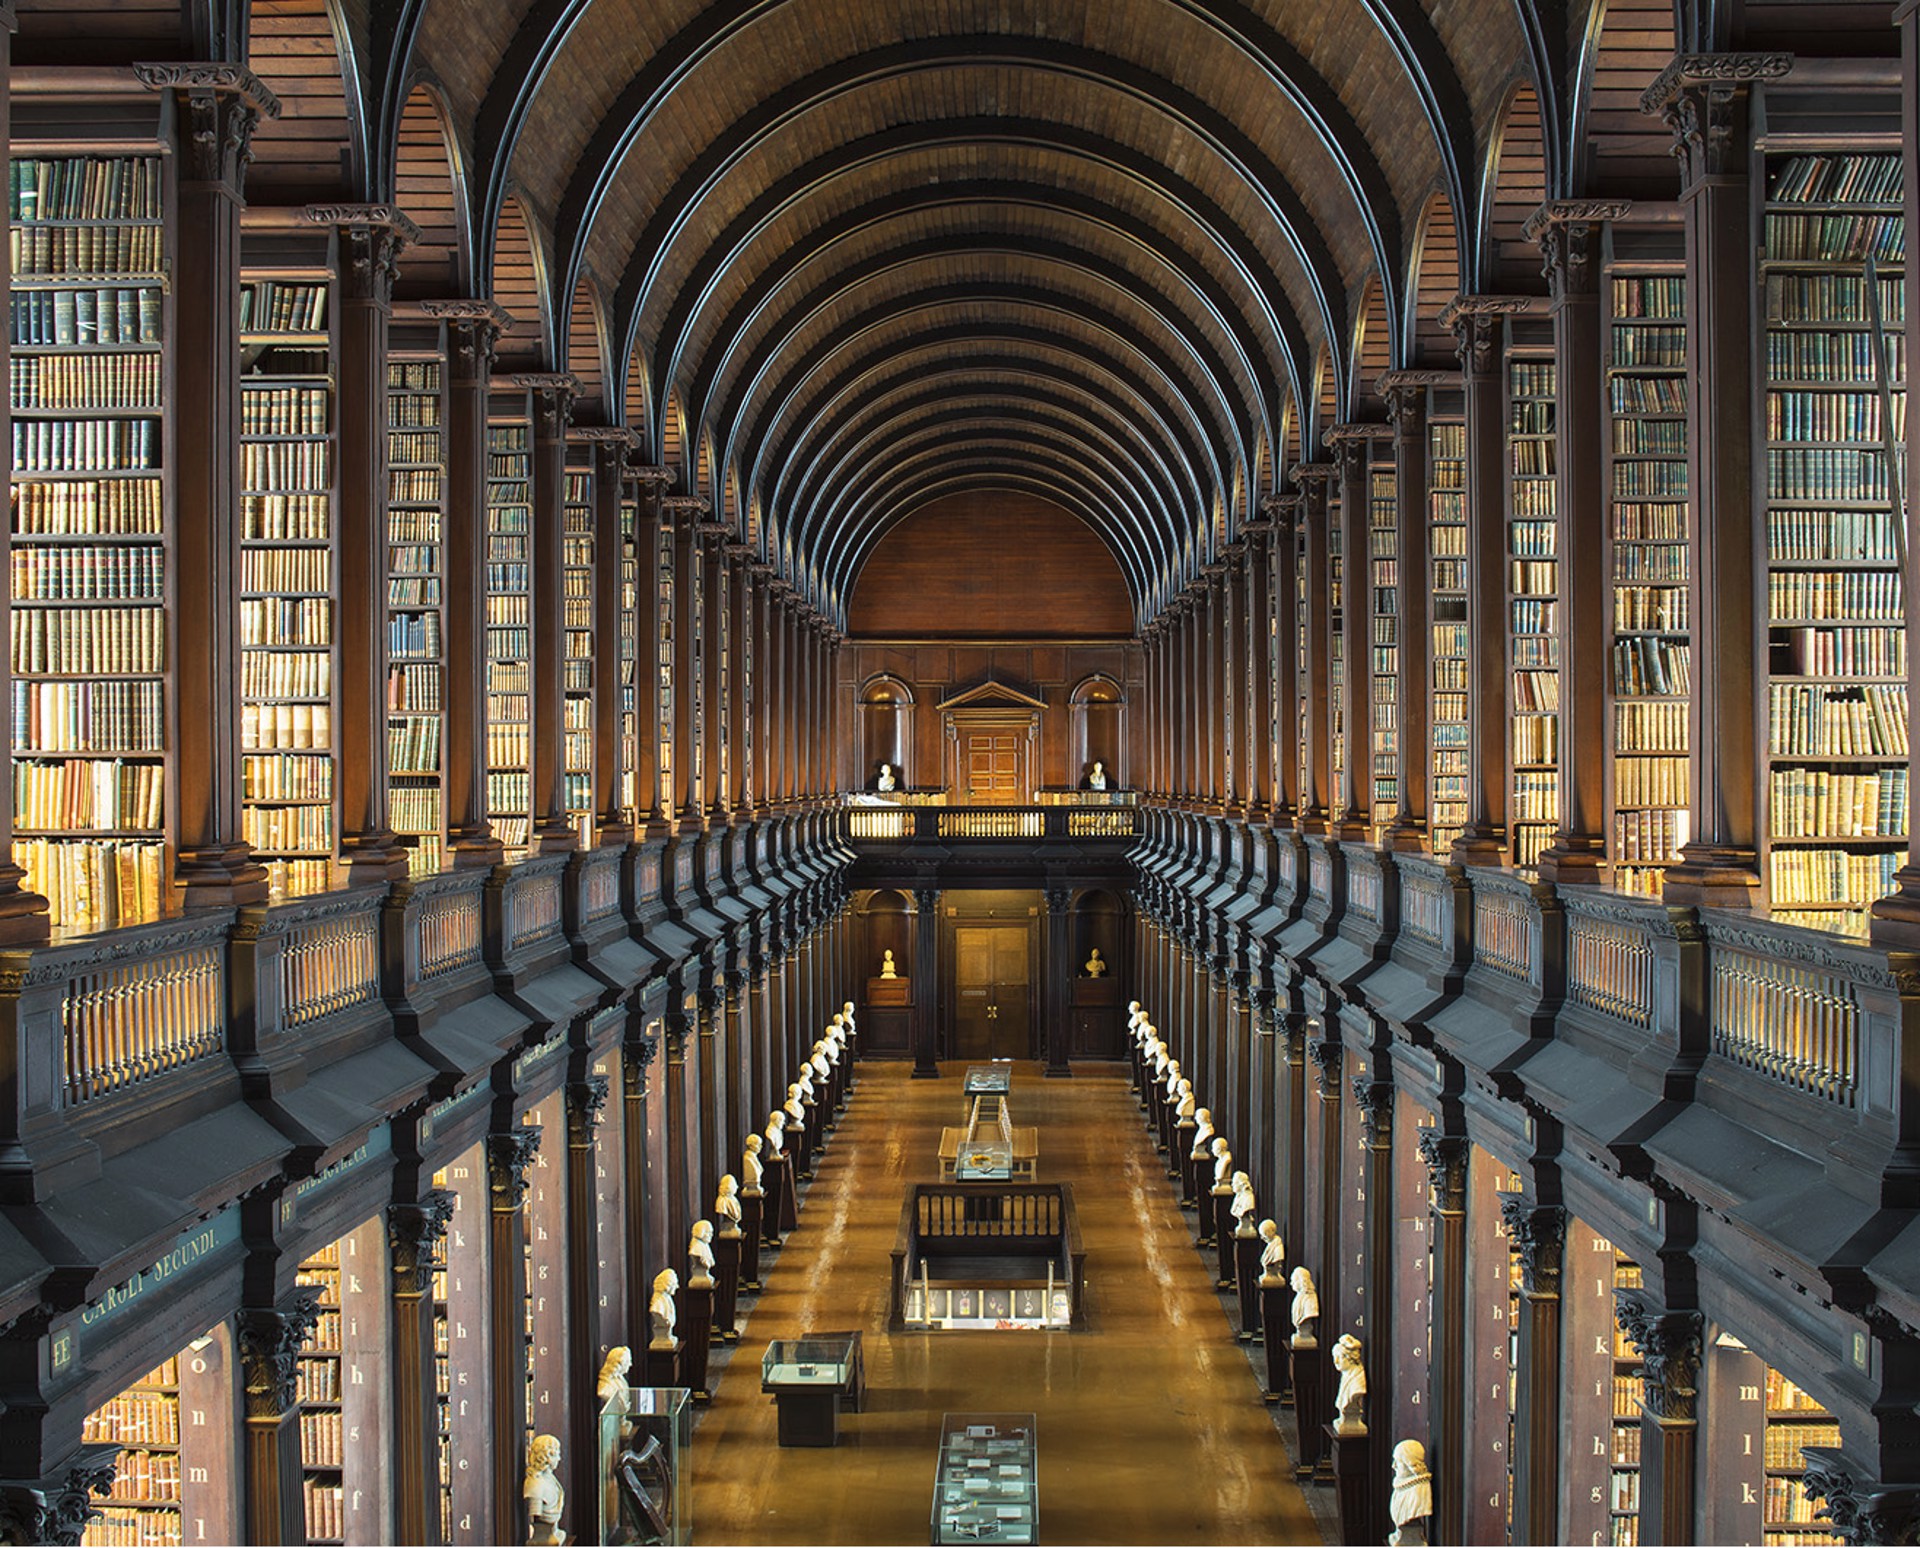 The Long Room IV - Trinity Library by Reinhard Goerner